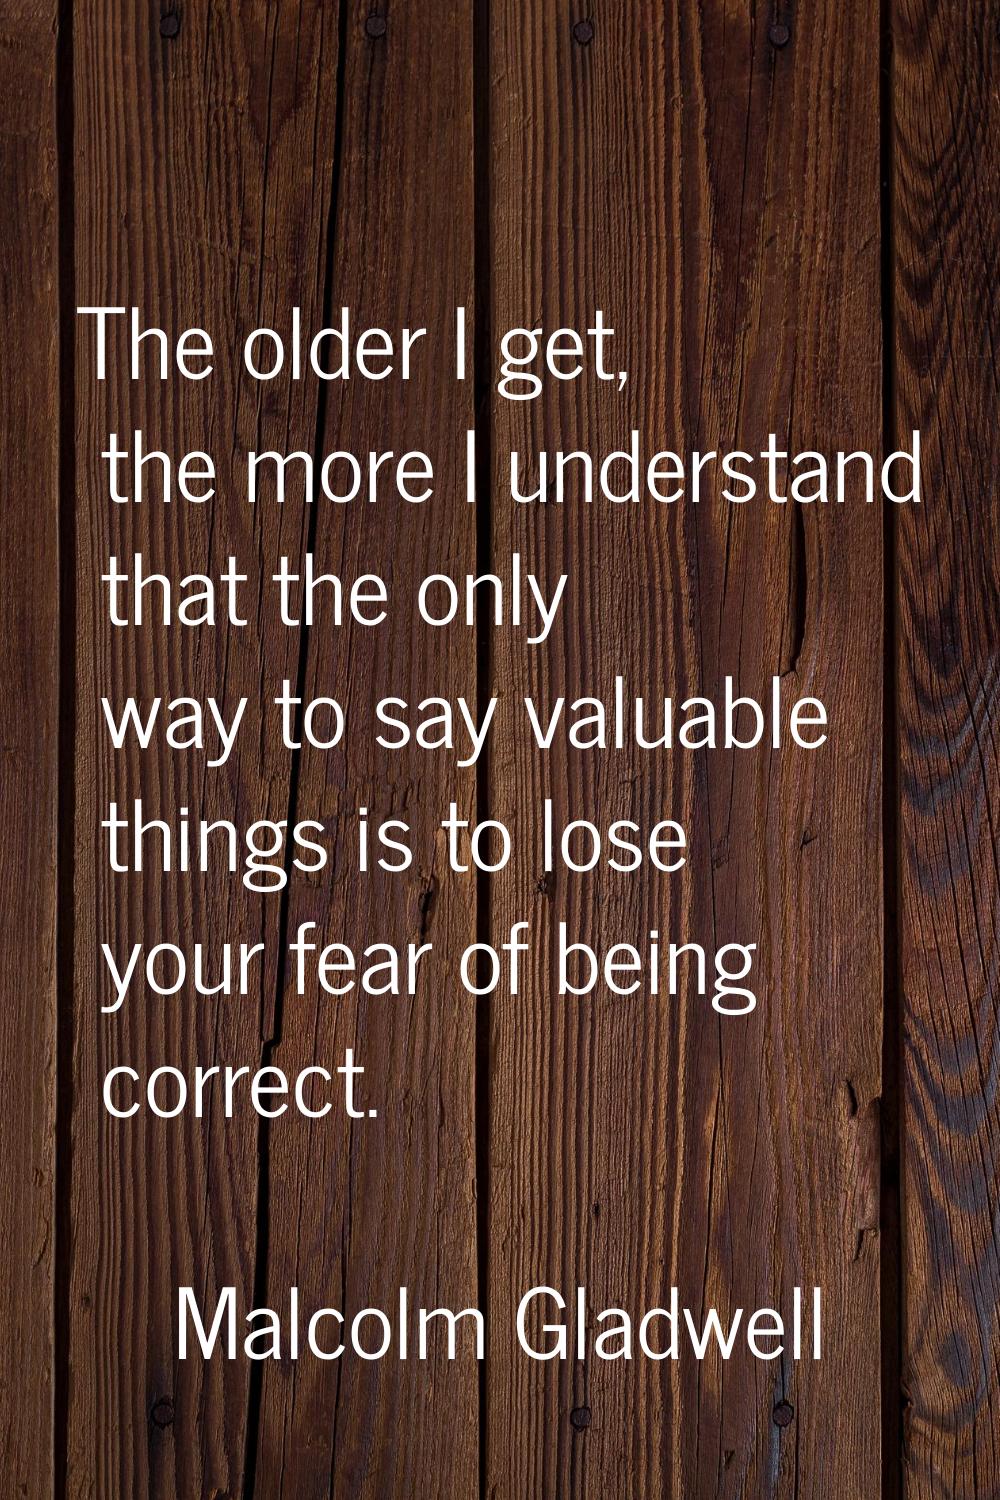 The older I get, the more I understand that the only way to say valuable things is to lose your fea